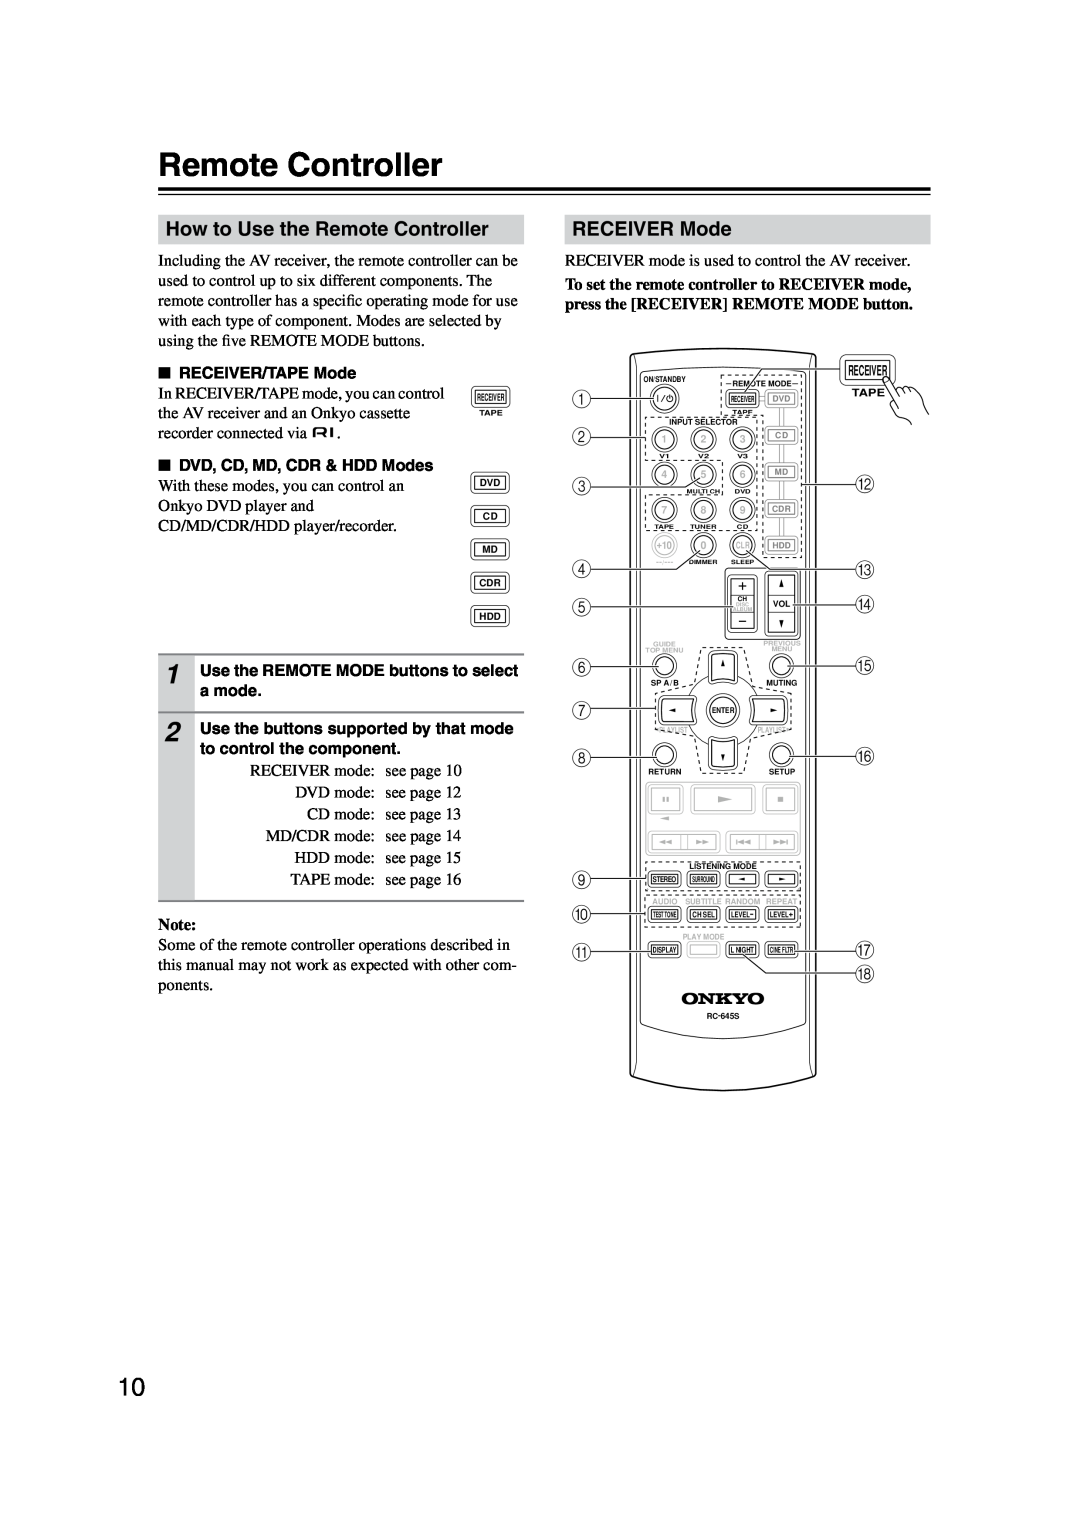 Onkyo TX-SR304 instruction manual How to Use the Remote Controller, RECEIVER Mode 